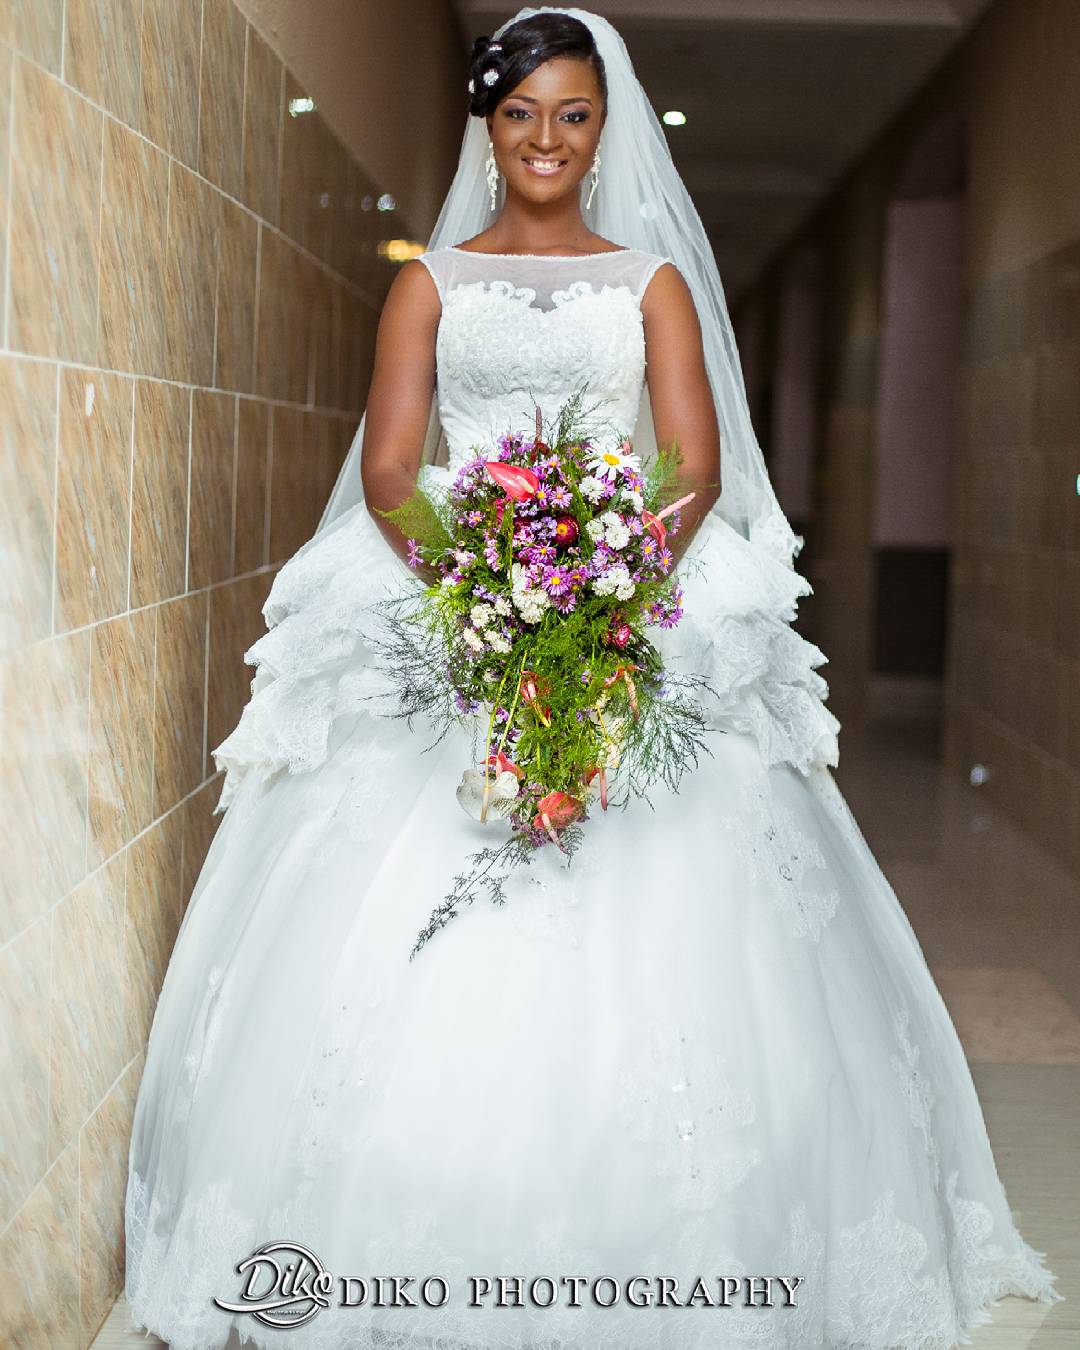 The Perfect Wedding Gown 02: @Dikophotography